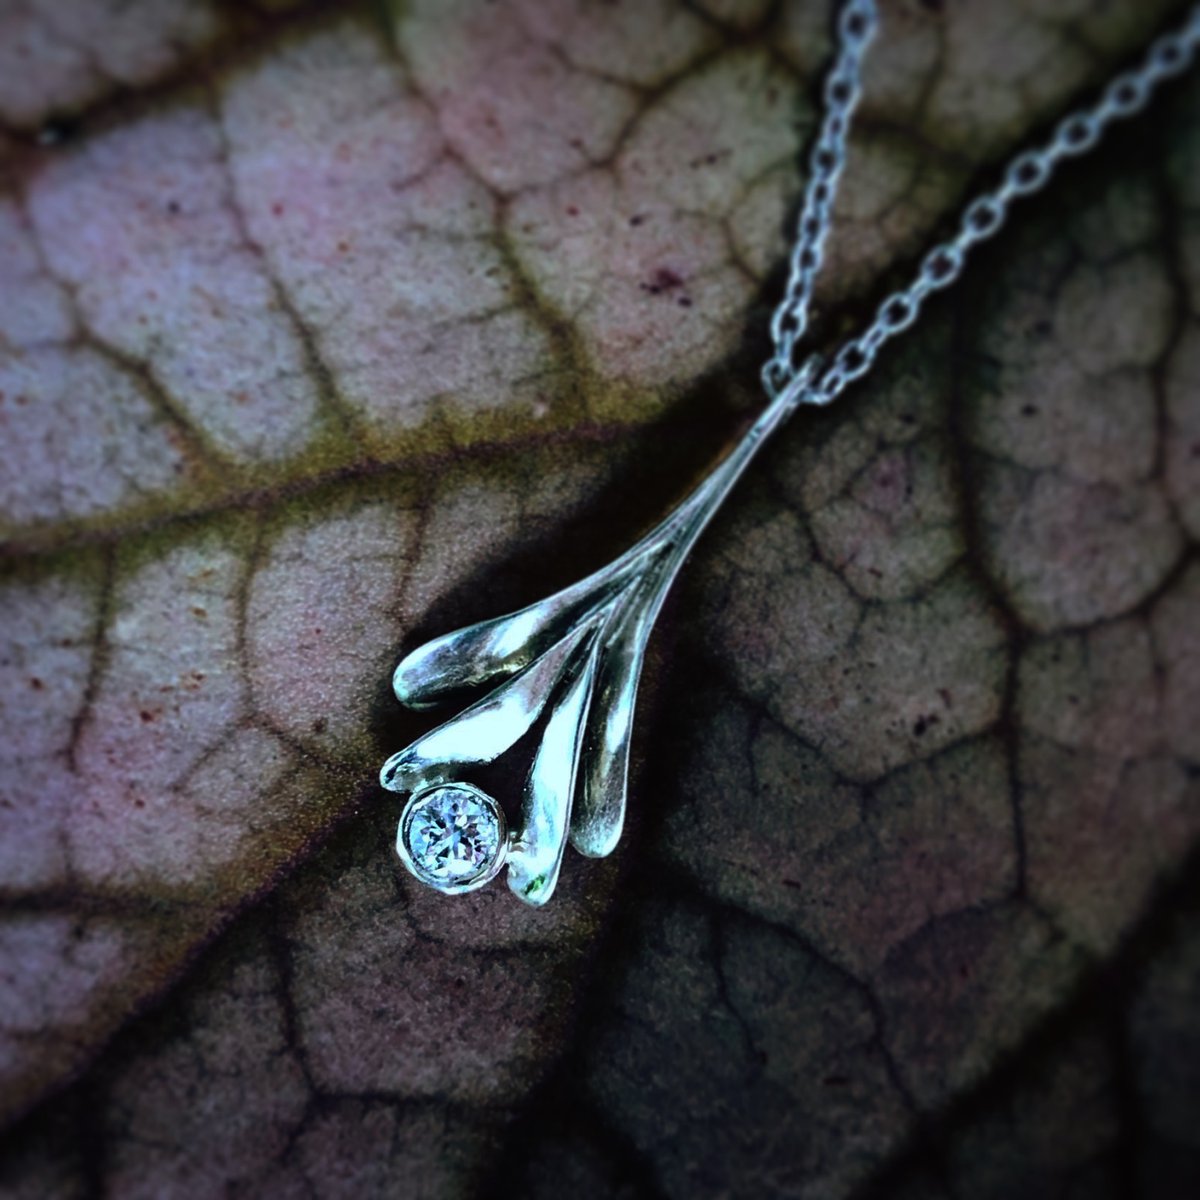 A dynamic alternative to the classic solitaire pendant. #whitegold #diamondsolitaire #InBloomJewelry bit.ly/2TrcIKh